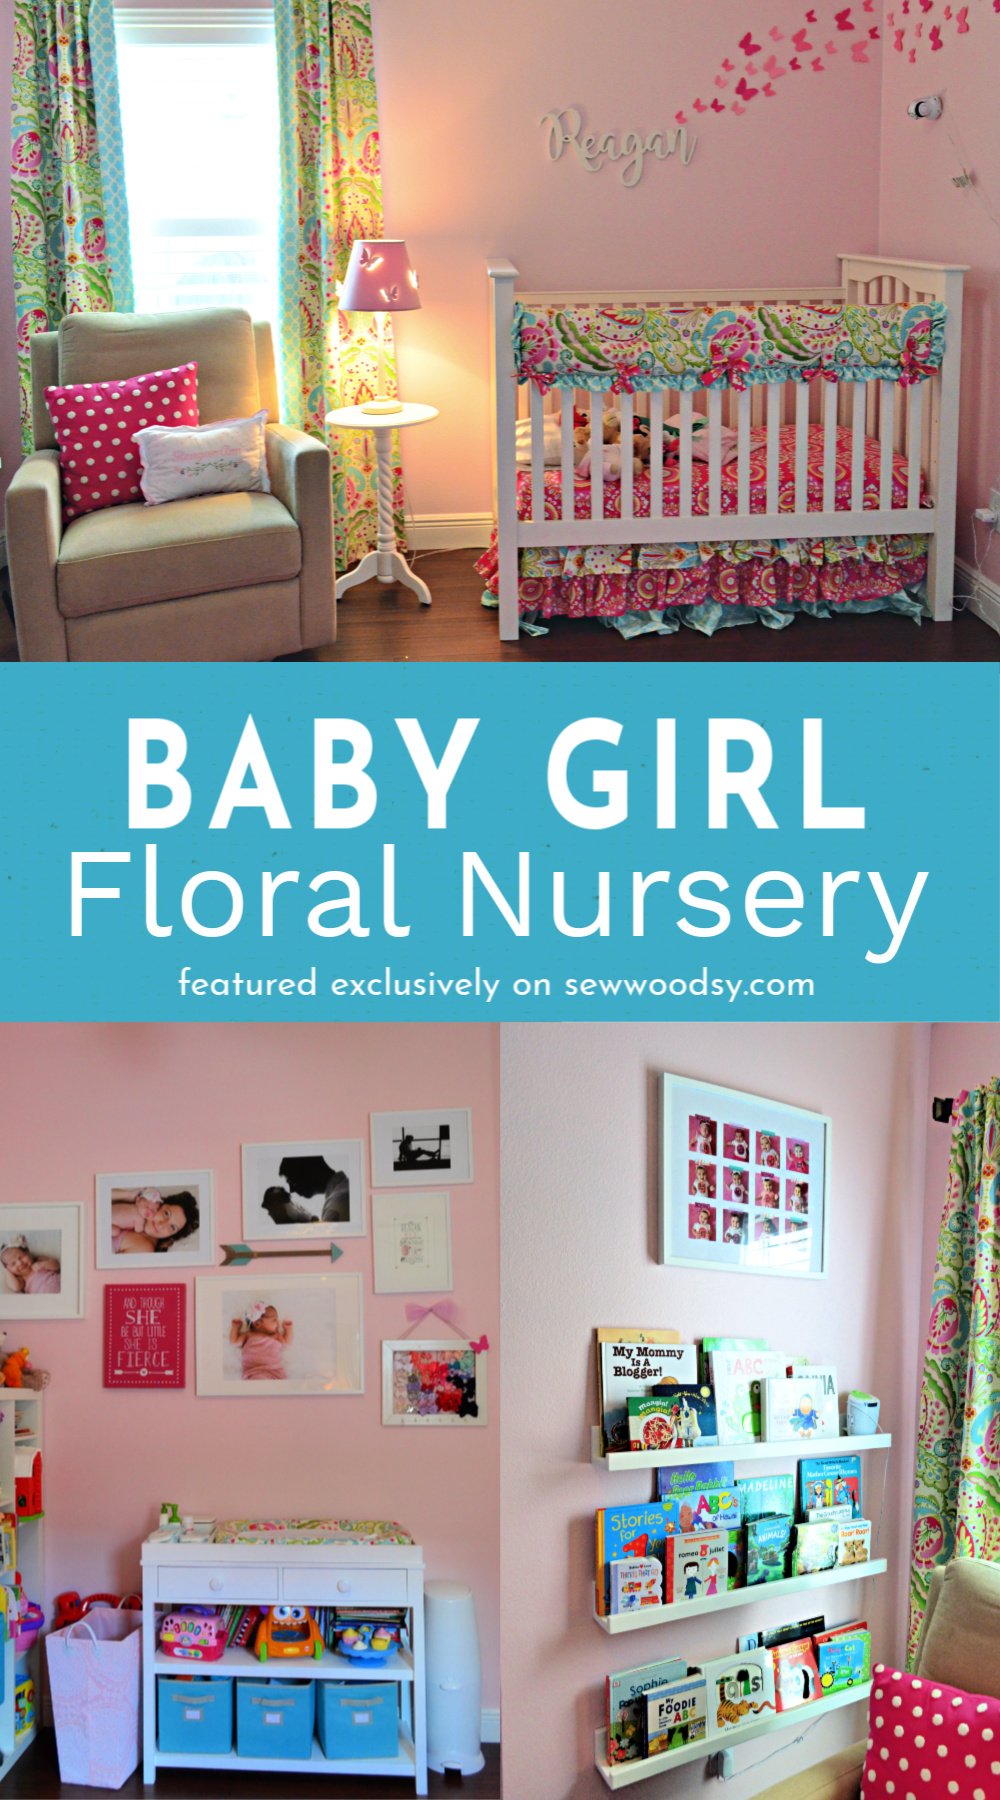 Two photos of a girls nursery with text on image for Pinterest.